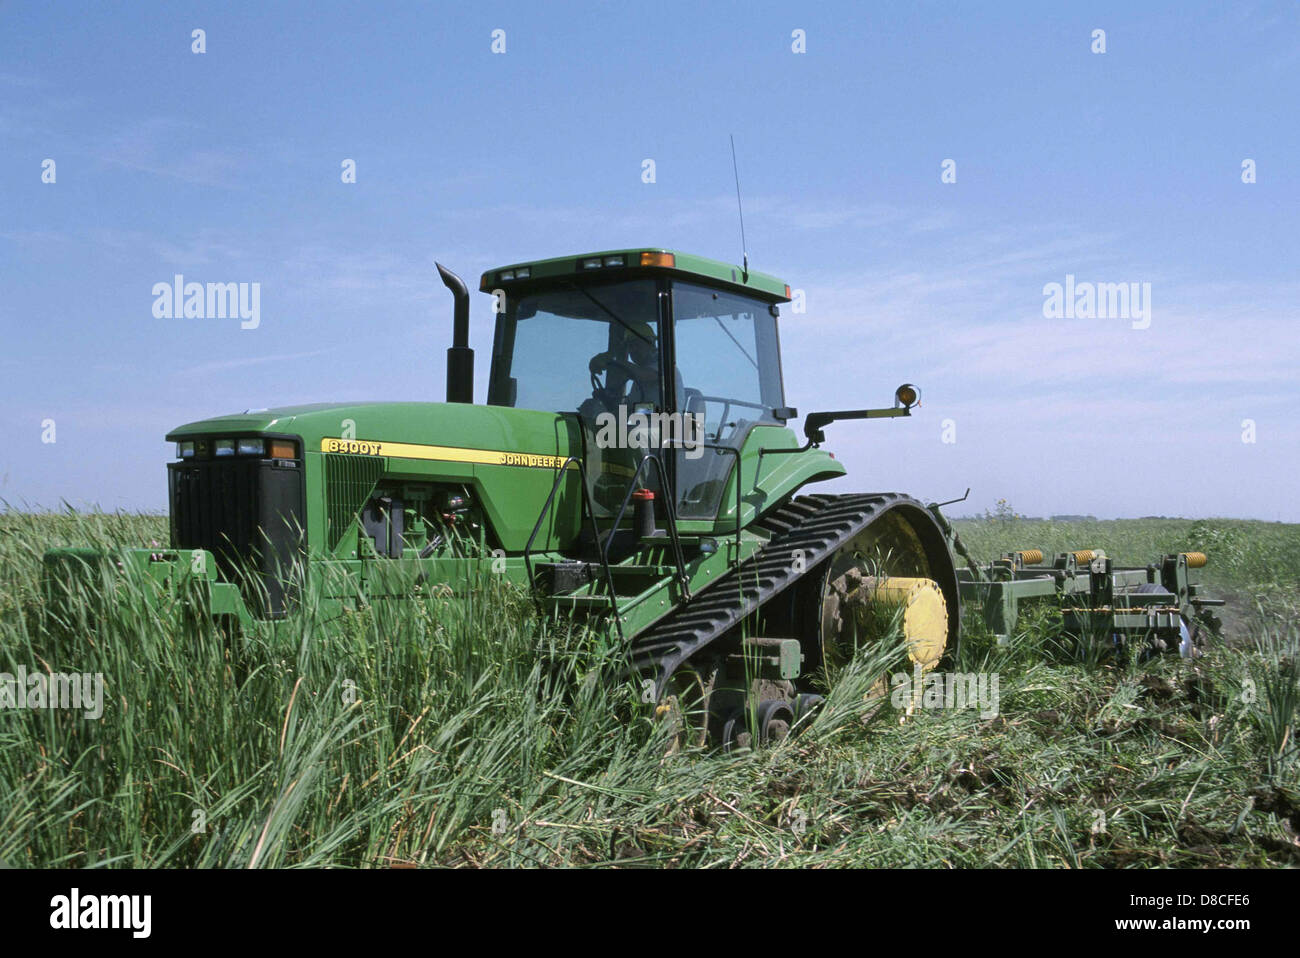 Big stron tractor wehicle working in grass. Stock Photo